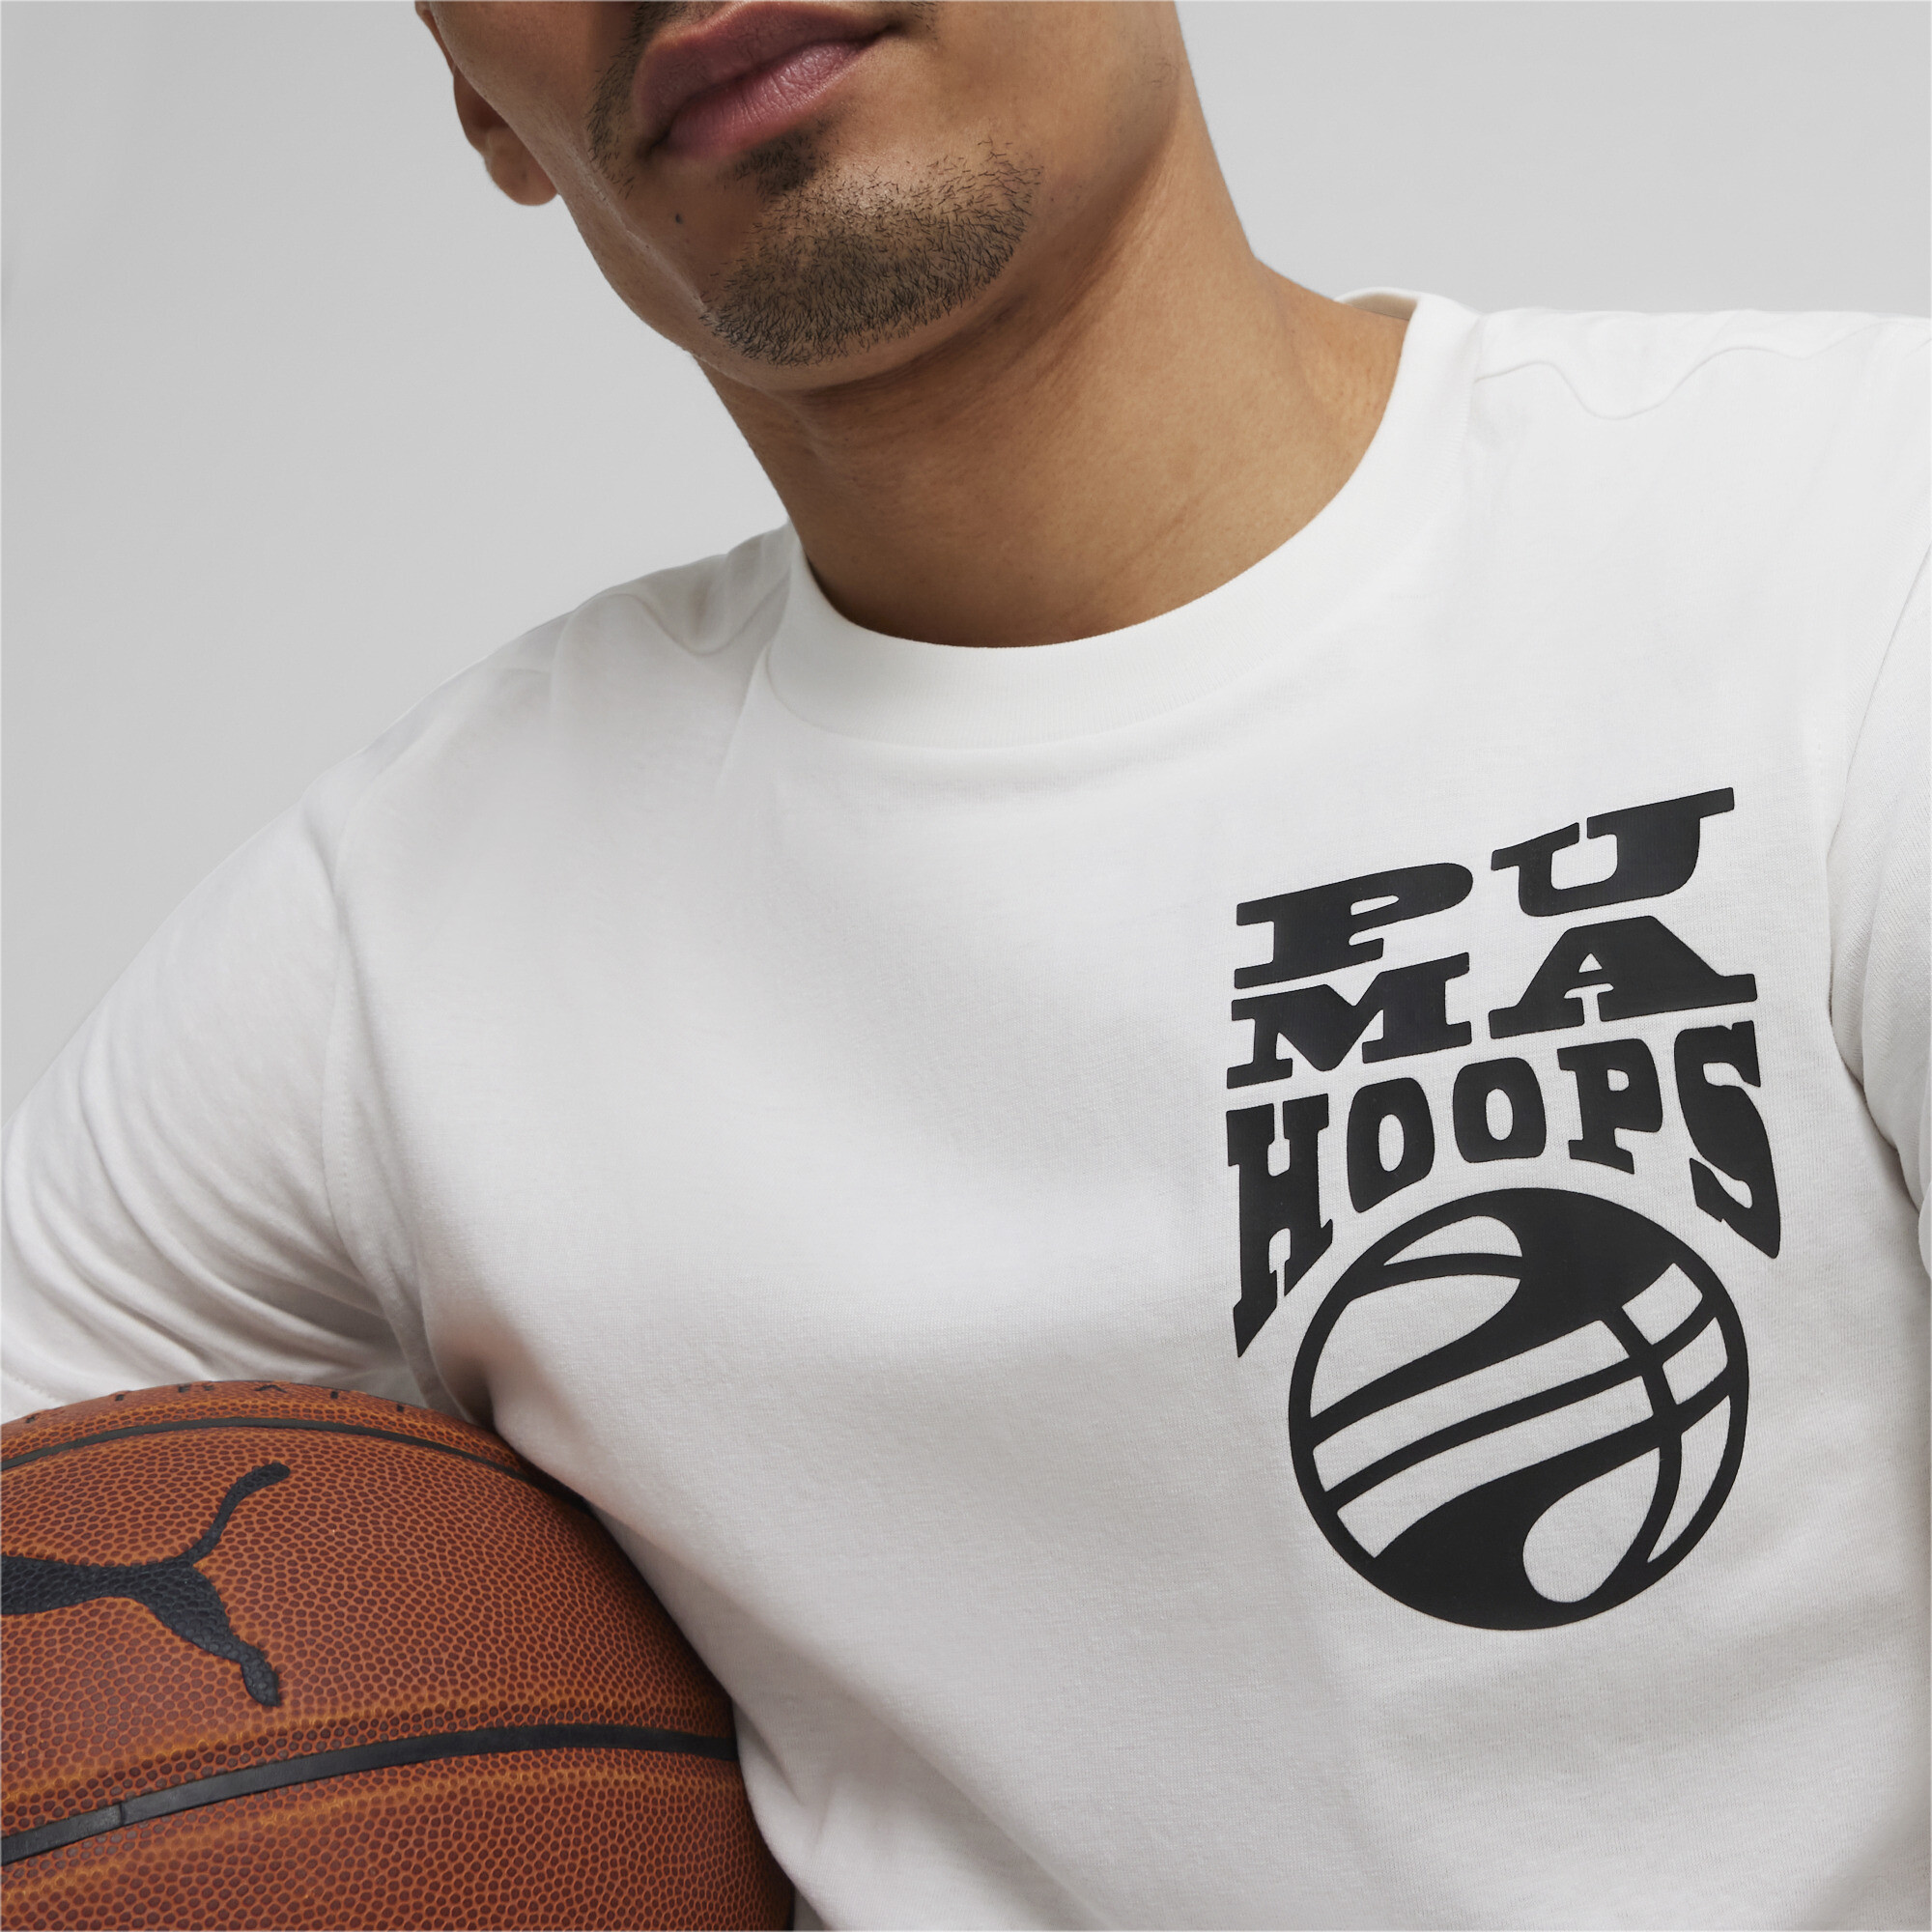 Men's PUMA The Hooper Basketball T-Shirt In White, Size Large